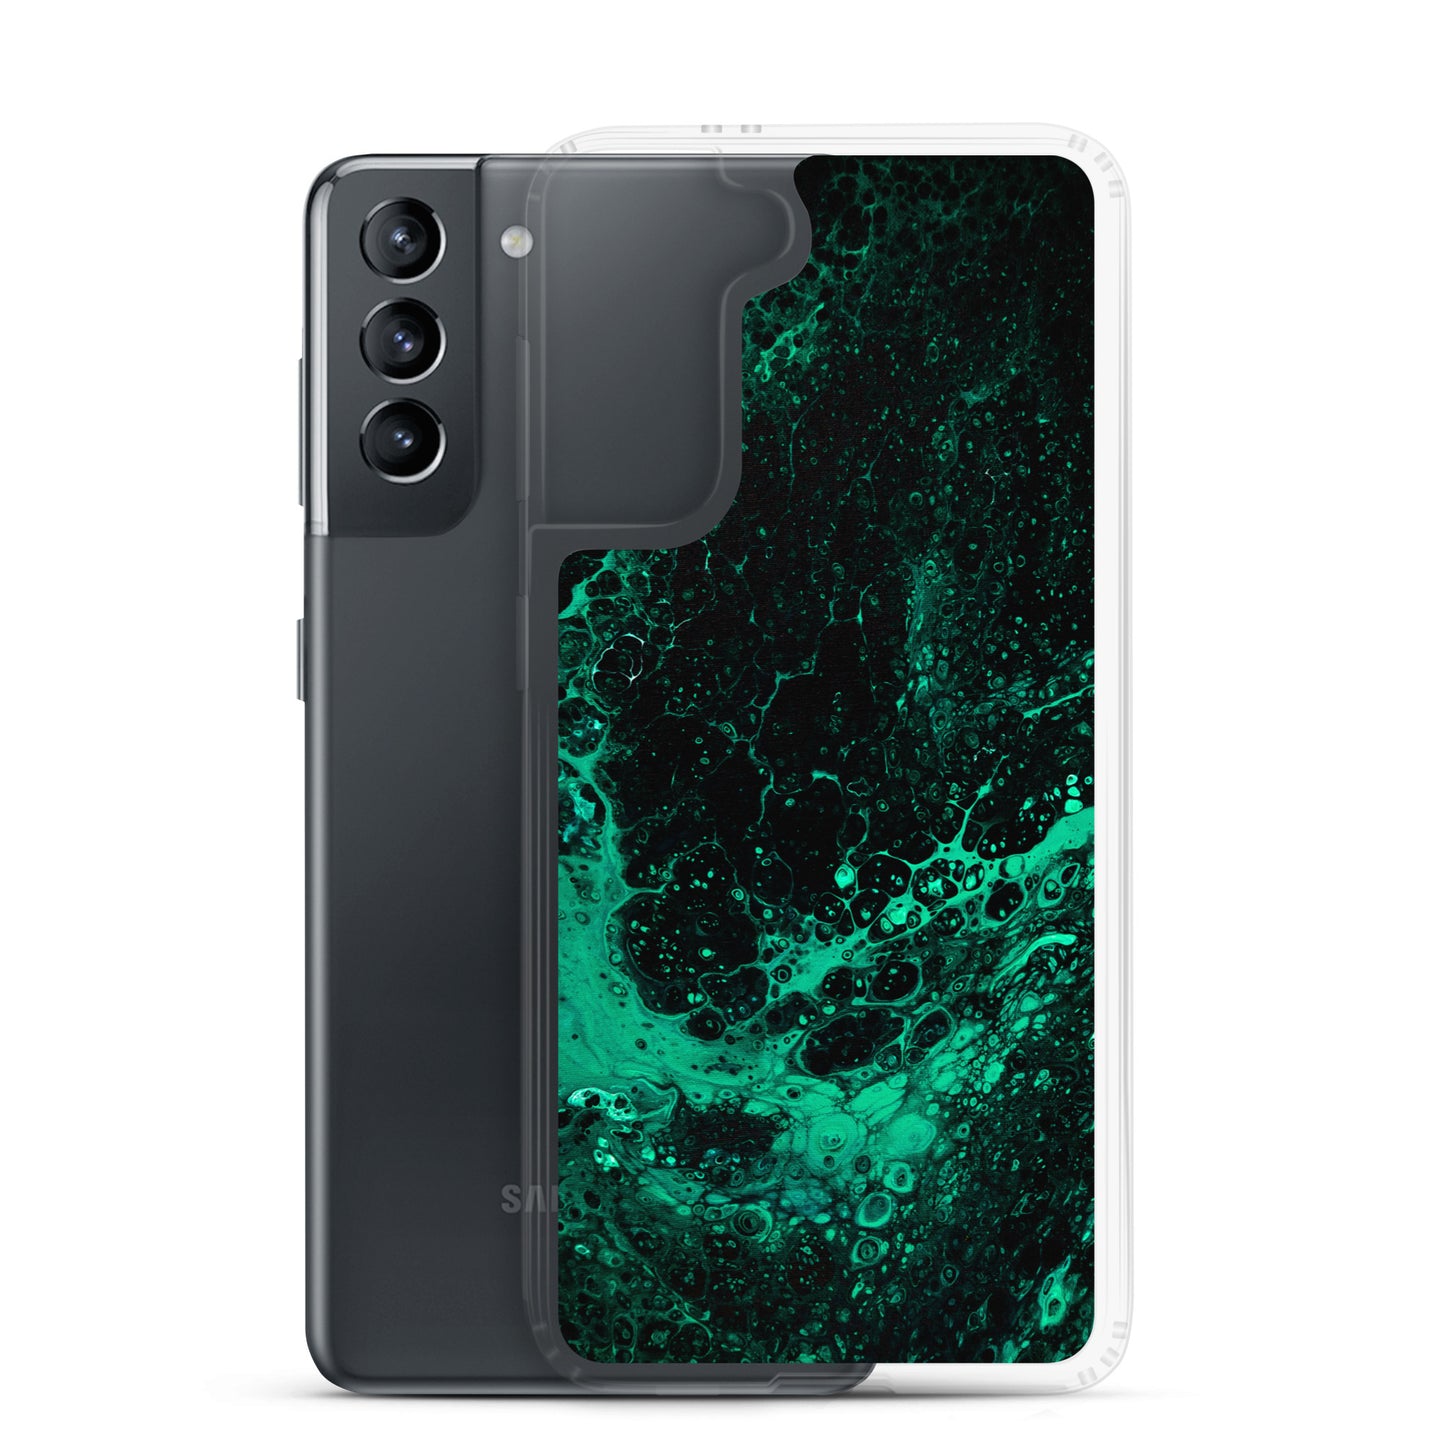 NightOwl Studio Custom Phone Case Compatible with Samsung Galaxy, Slim Cover for Wireless Charging, Drop and Scratch Resistant, Green Tide